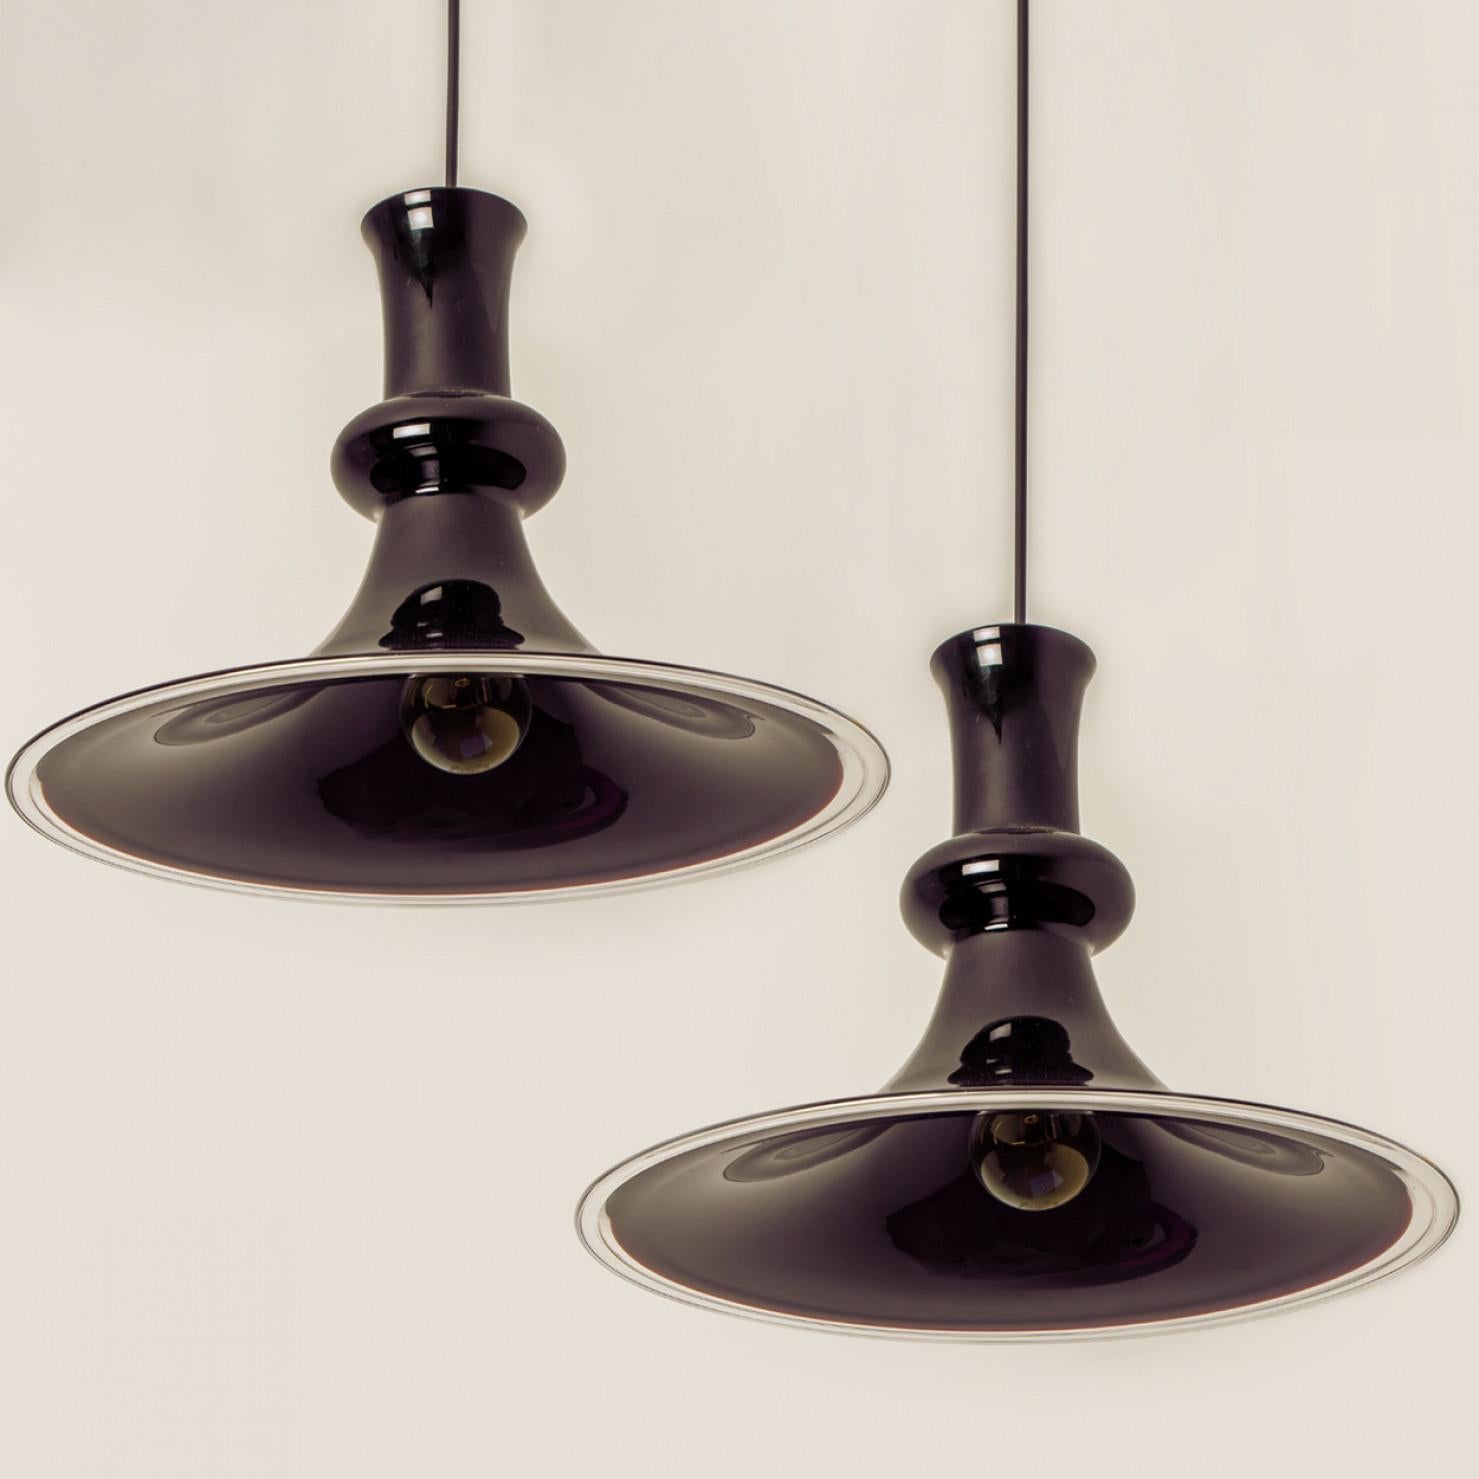 Pair of Aubergine Holmegaard Hanging Lamps model Etude by Michael Bang, 1970 For Sale 7